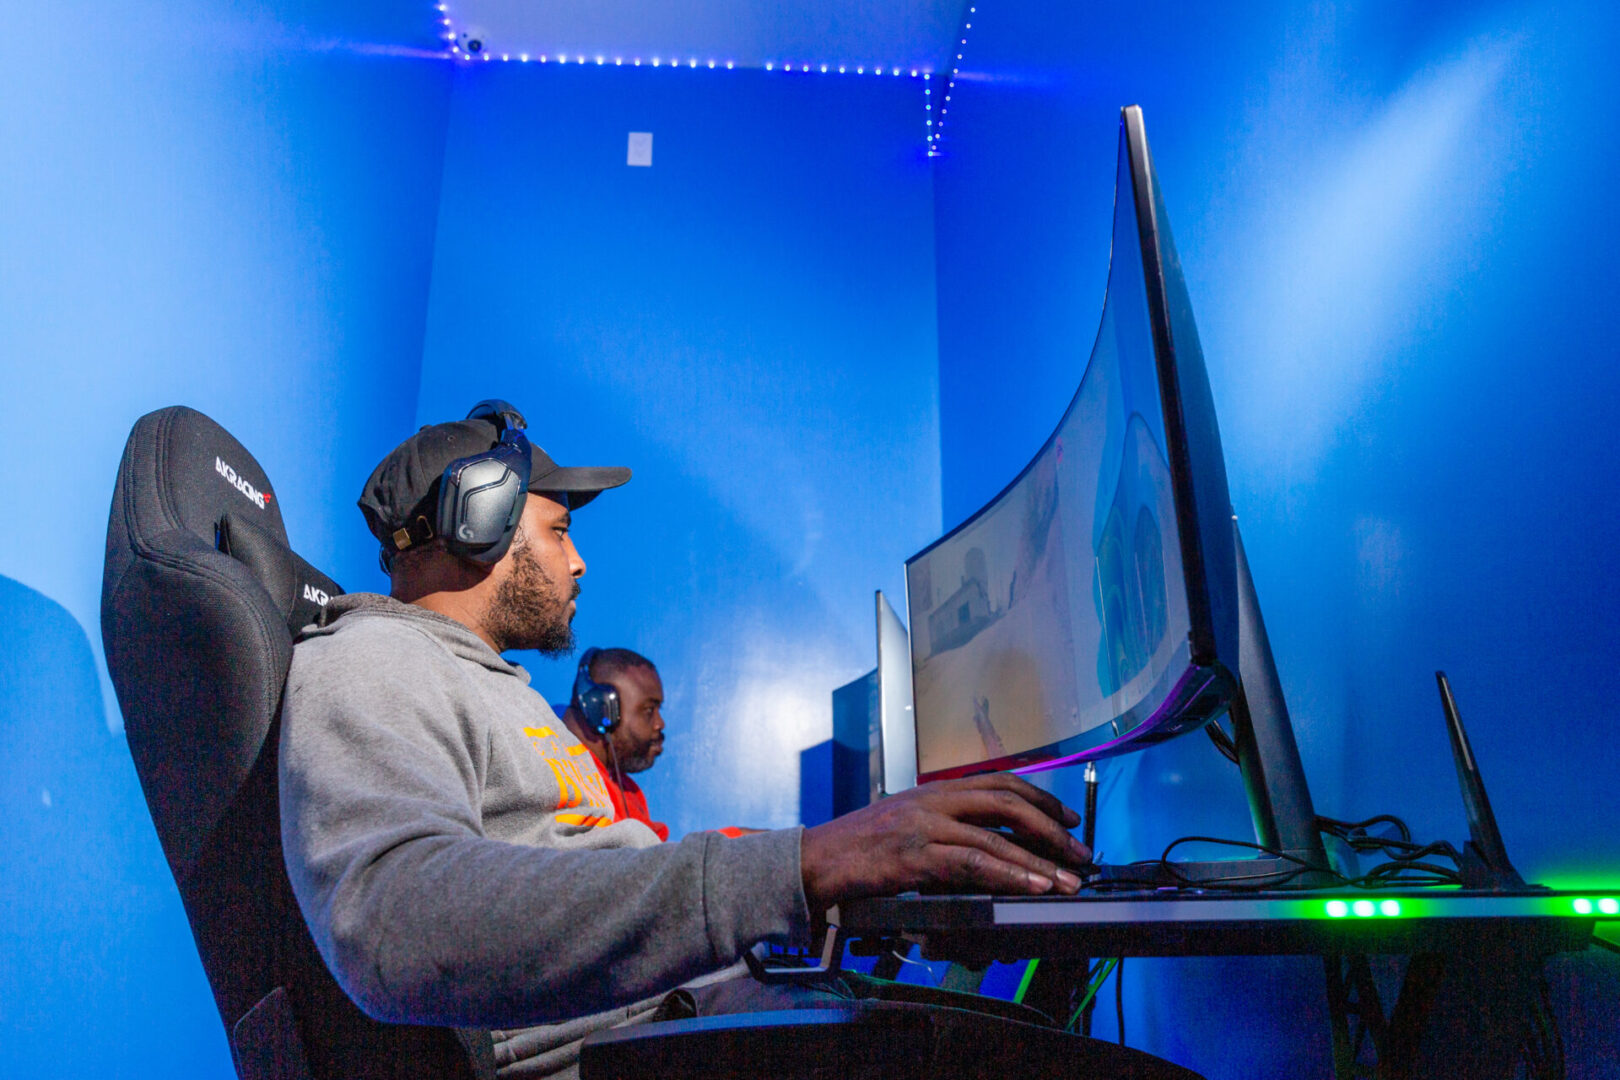 a man wearing headphones and cap is playing a game